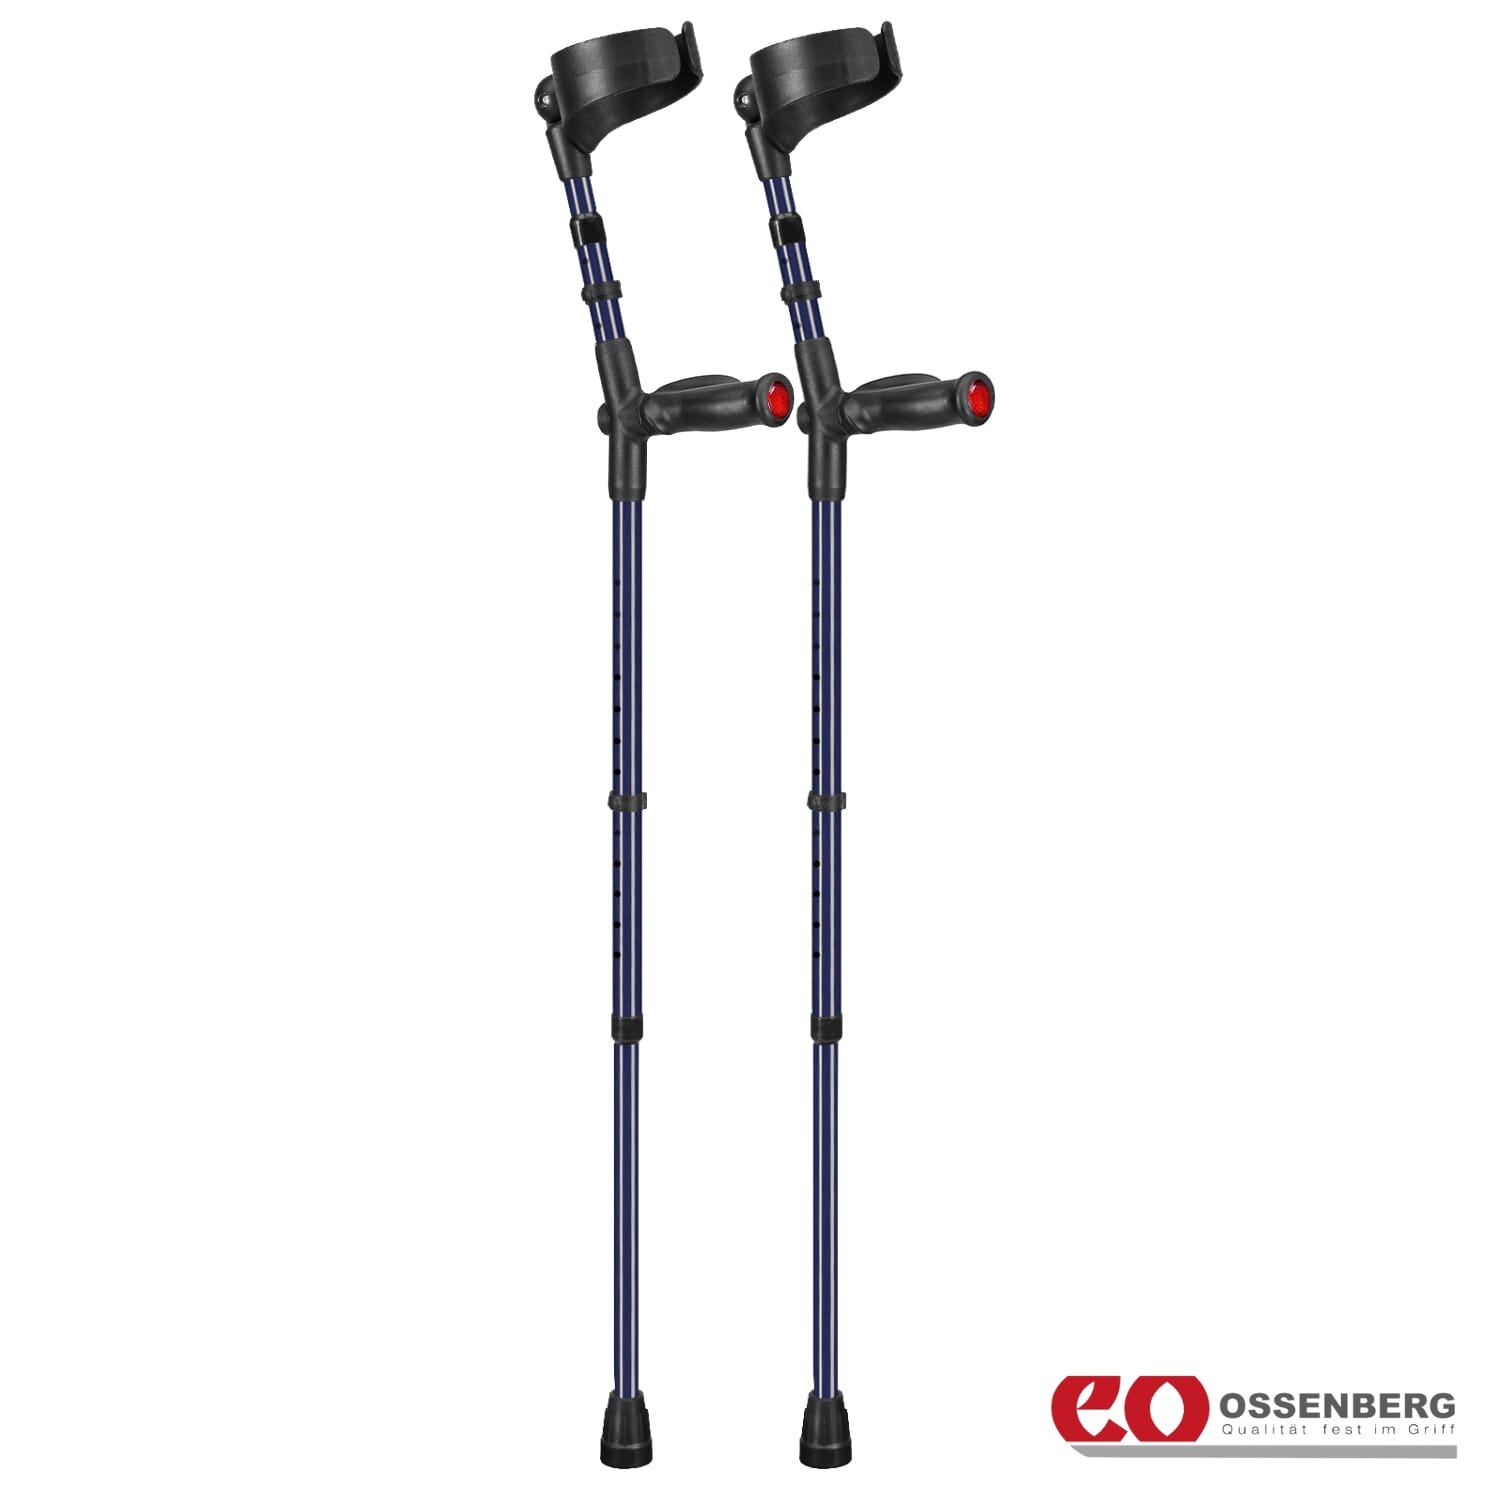 View Ossenberg Comfort Grip Double Adjustable Crutches Blue Pair information